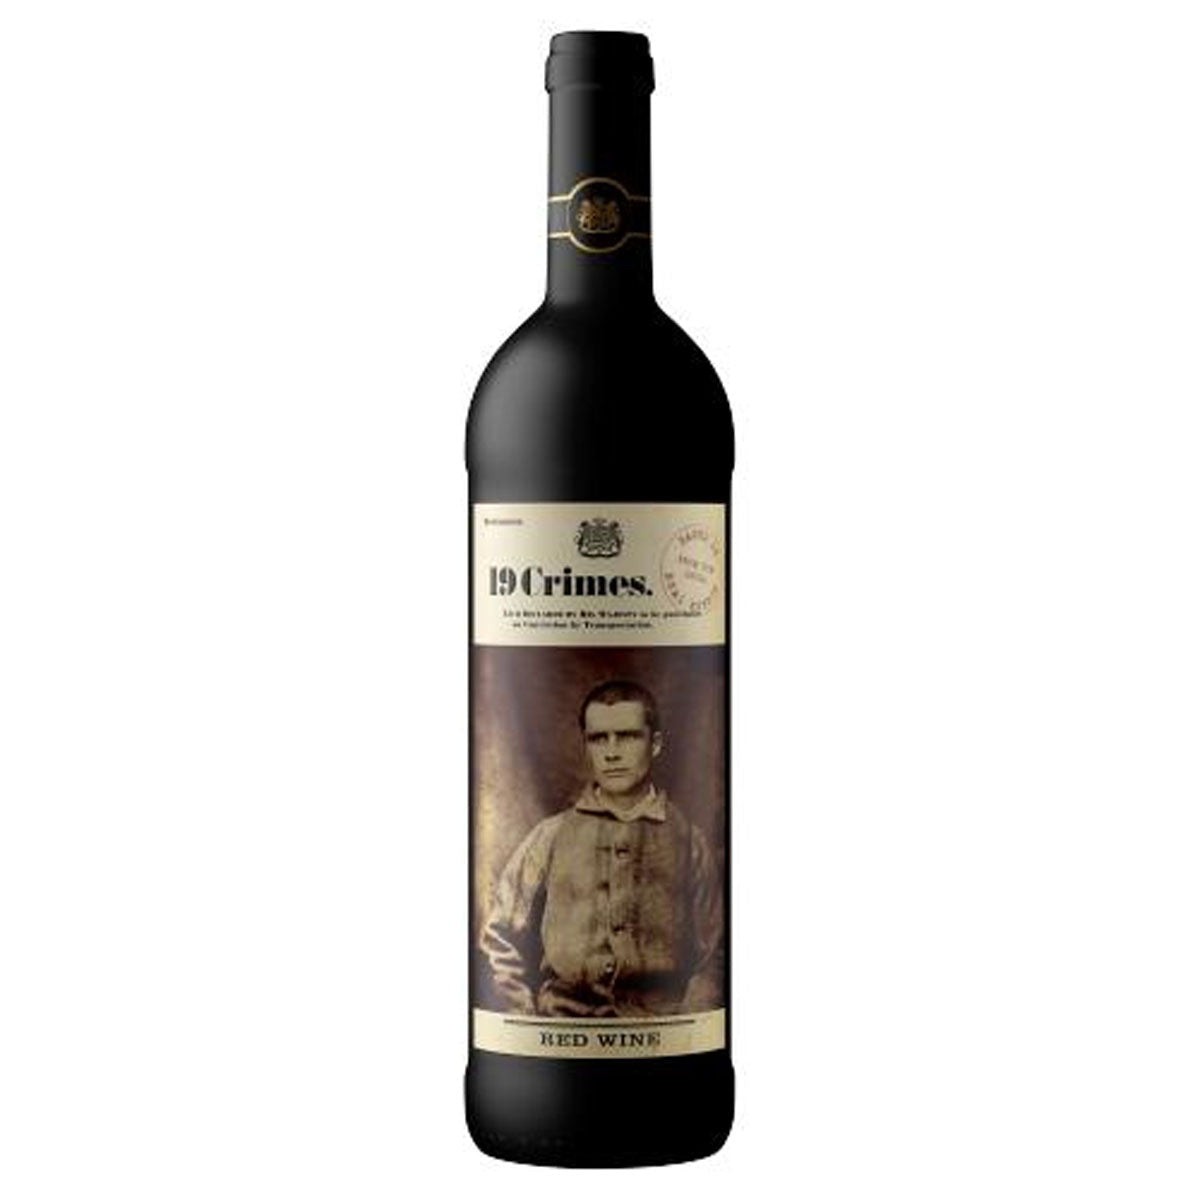 A bottle of 19 Crimes - Red Wine (13.5% ABV) - 750ml with an image of a baseball player.